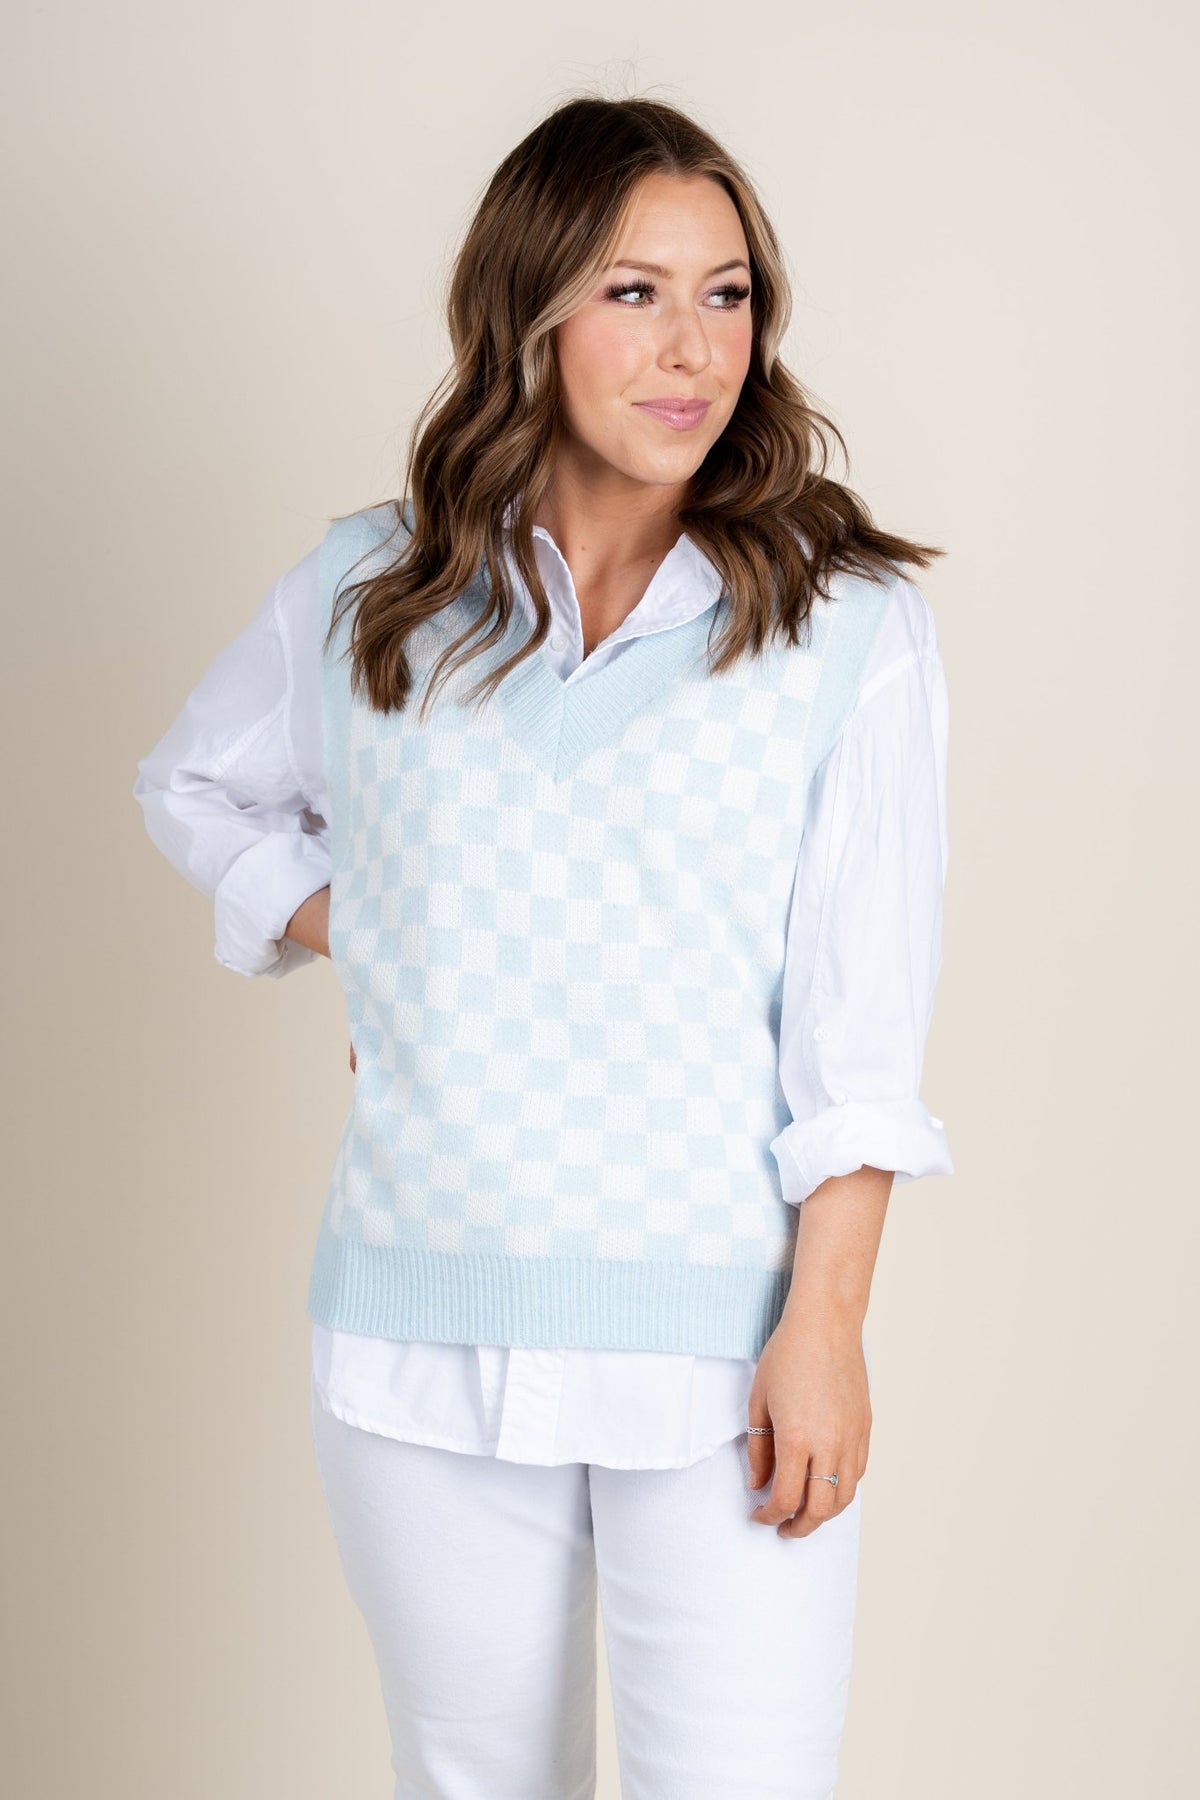 Checkered sweater vest blue - Stylish sweater vest -  Cute Bridal Collection at Lush Fashion Lounge Boutique in Oklahoma City